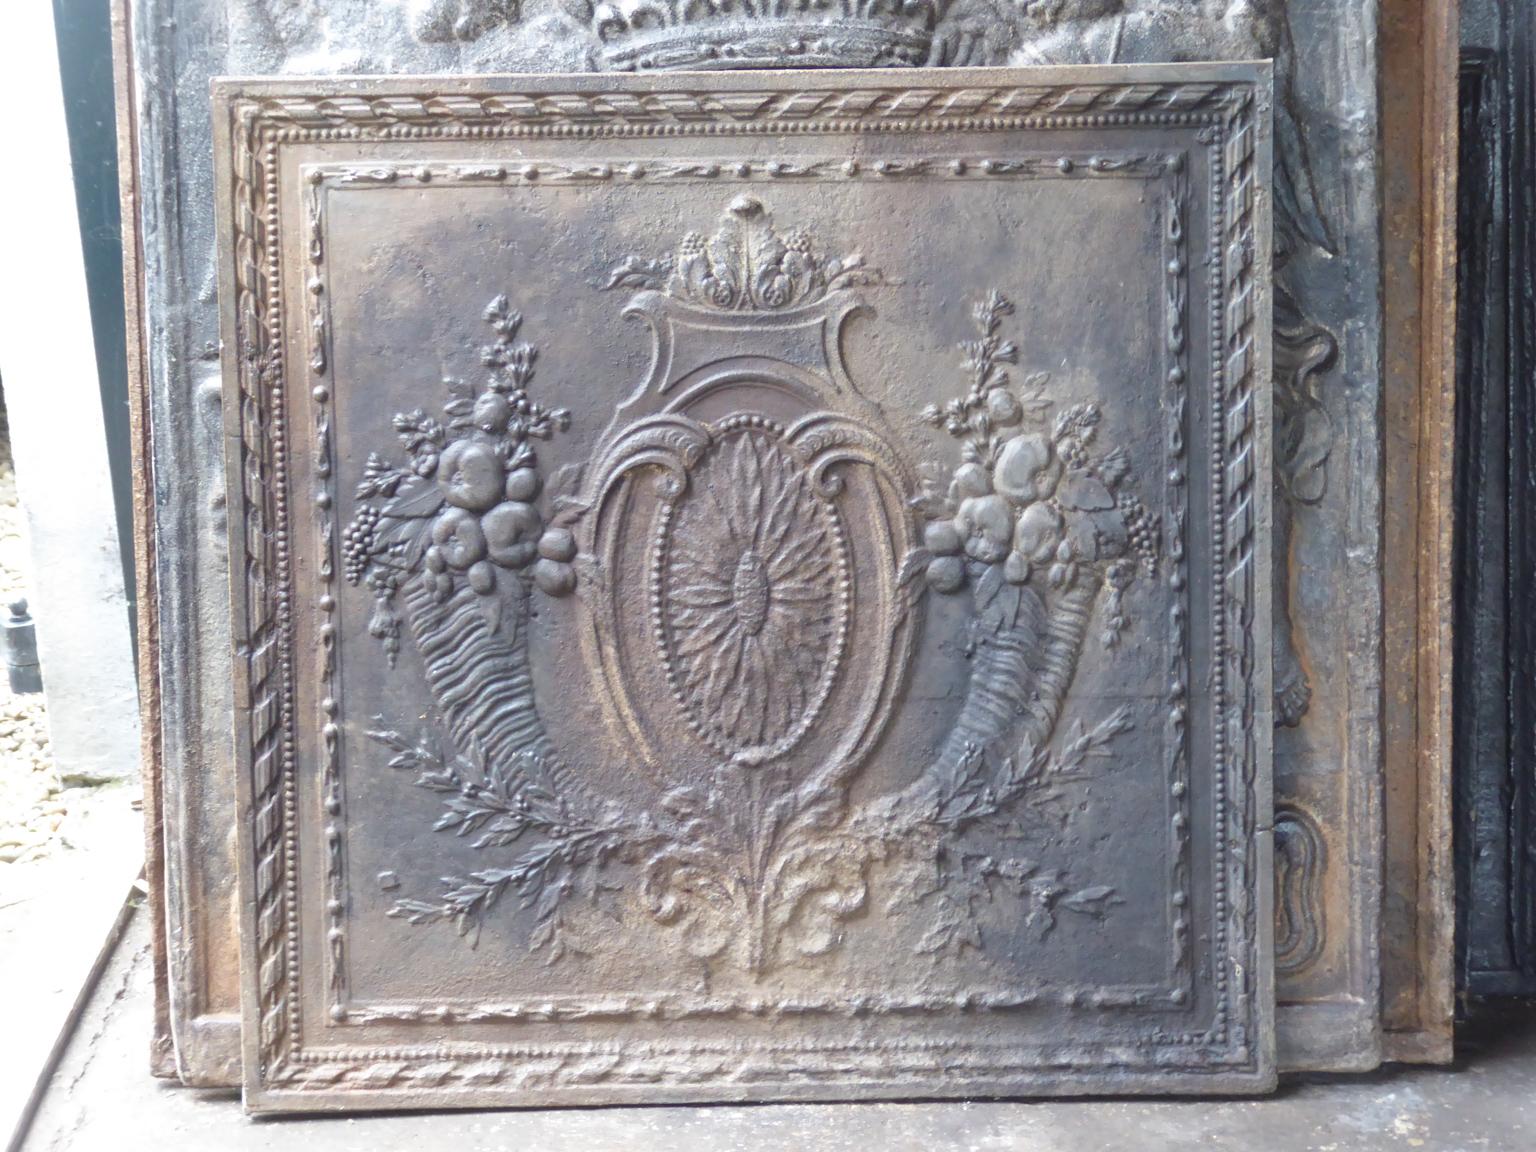 18th century French Louis XV 'Fruits of the Summer' fireplace fireback. With two horns of plenty, a sunflower and other greenery. The fireback is made of cast iron and has a natural brown patina. Upon request it can be made black / pewter. The